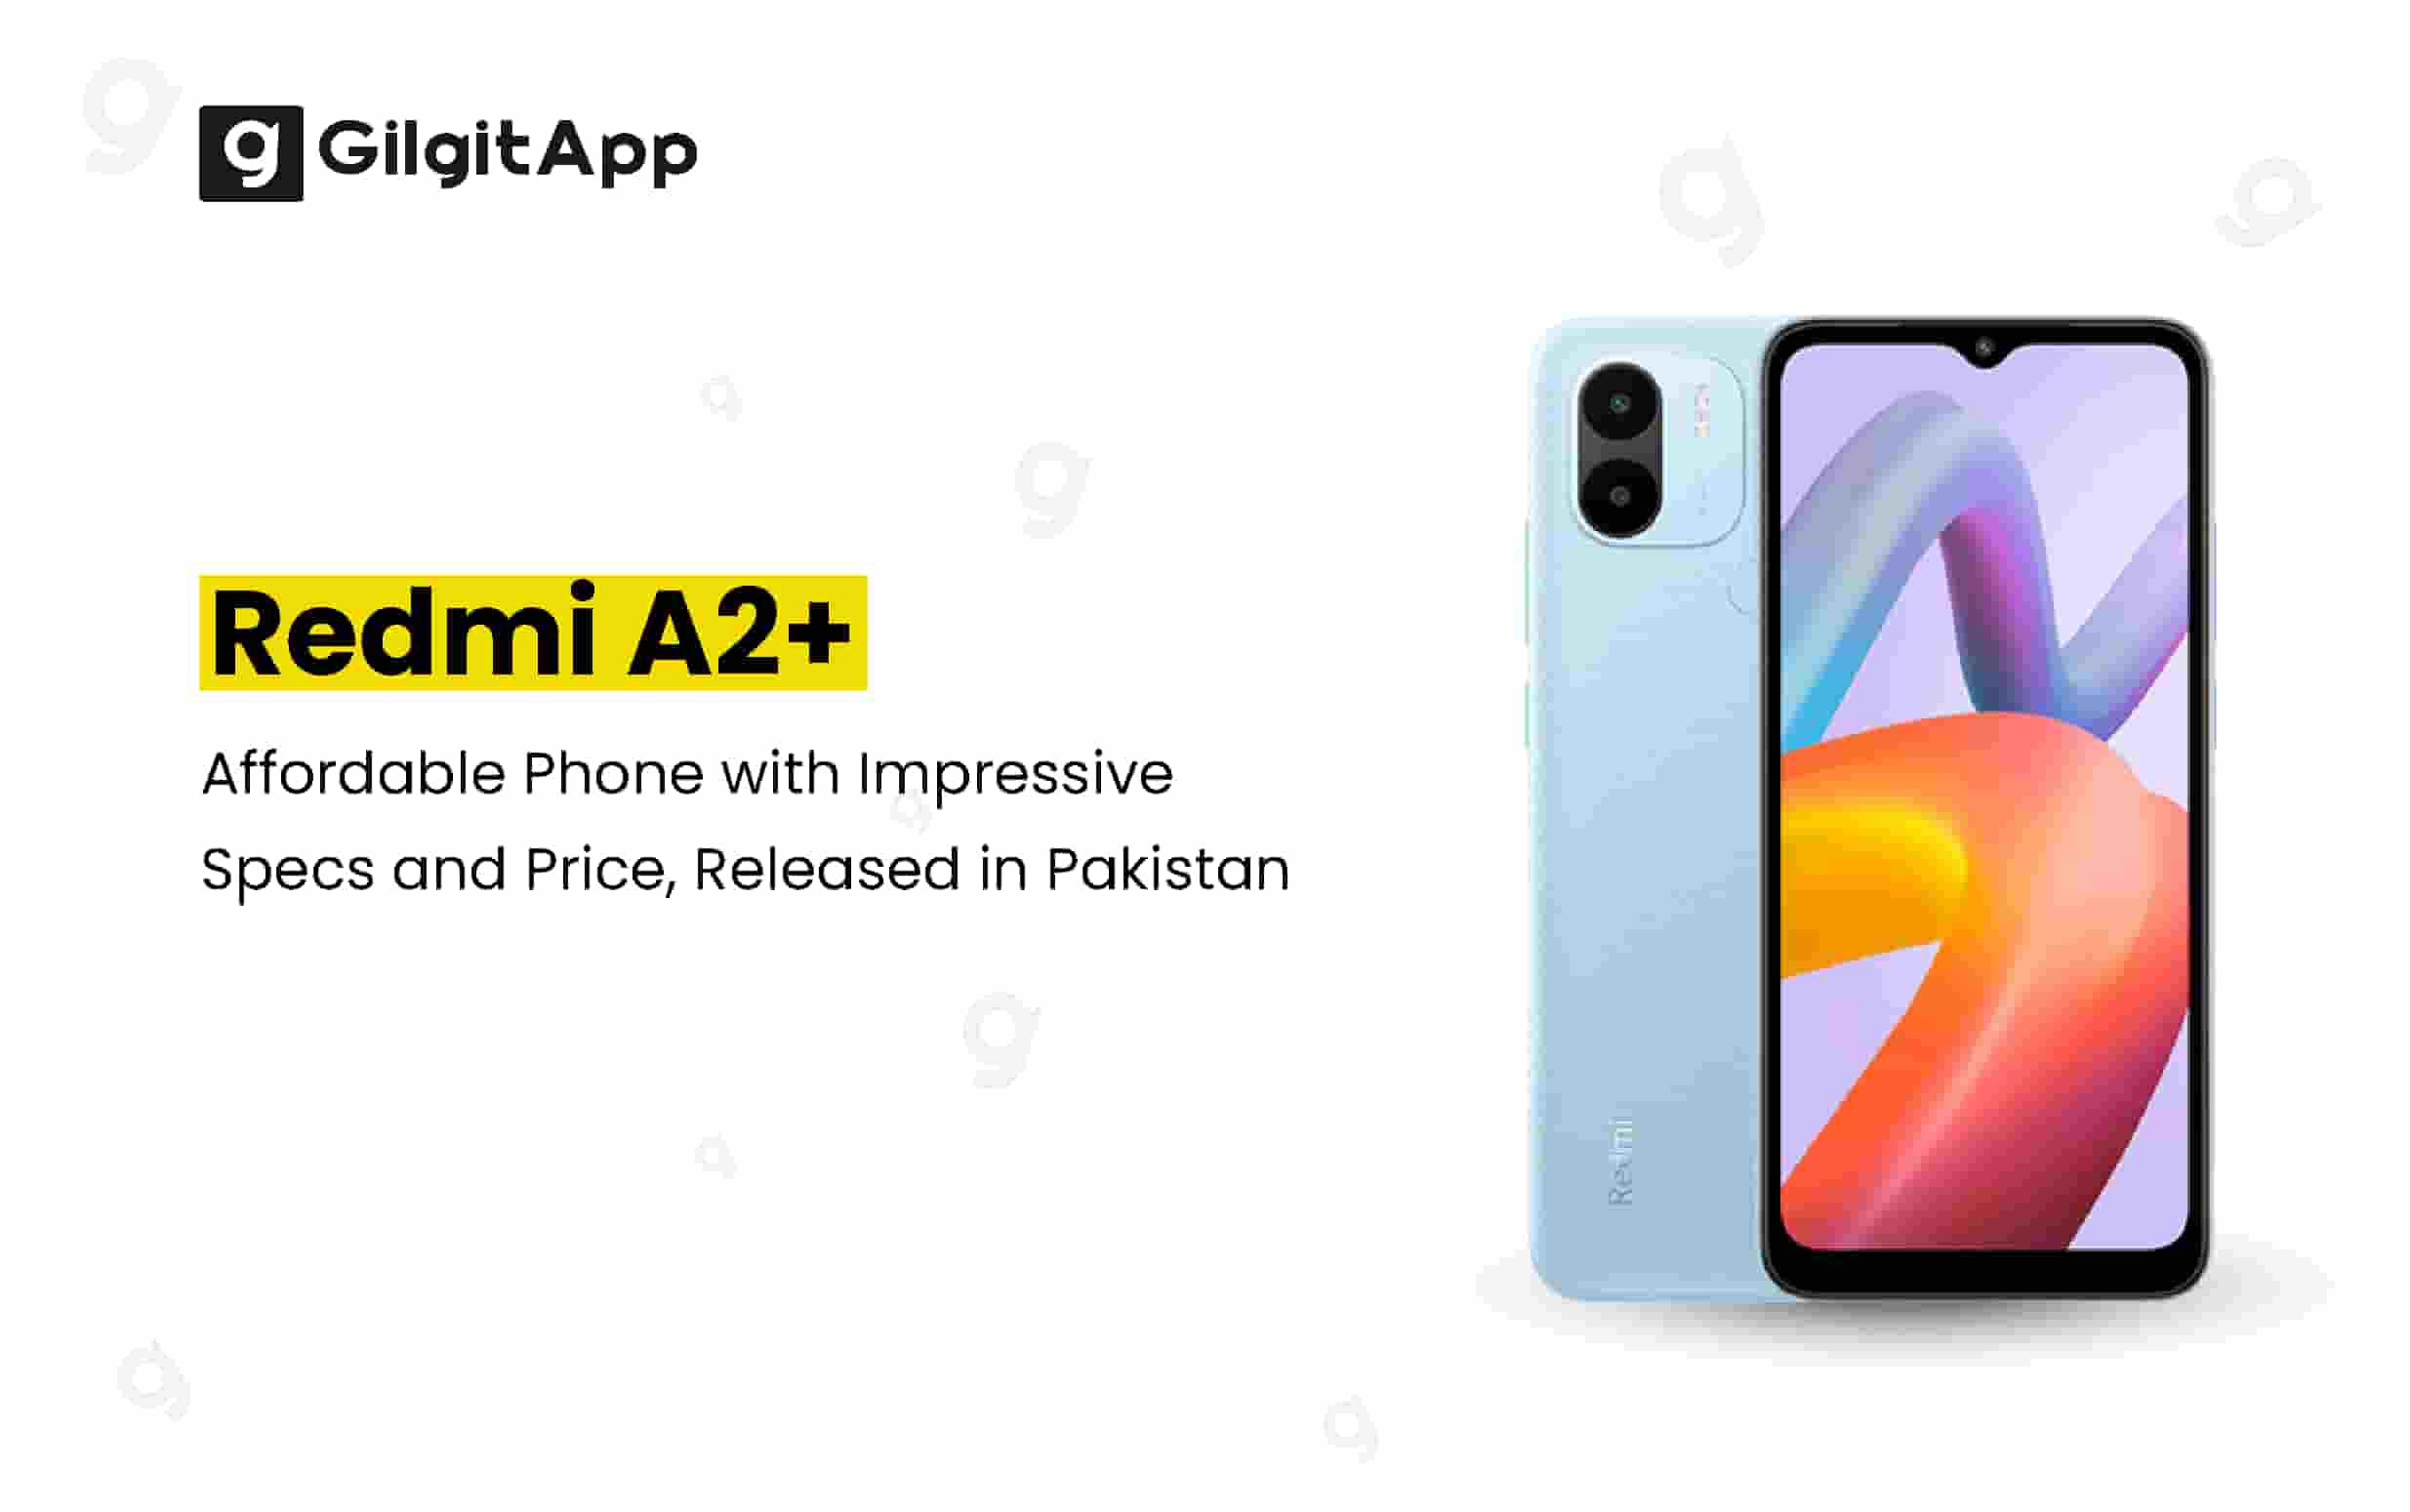 Cheapest Phone Released: Redmi A2+ Price in Pakistan and Specs